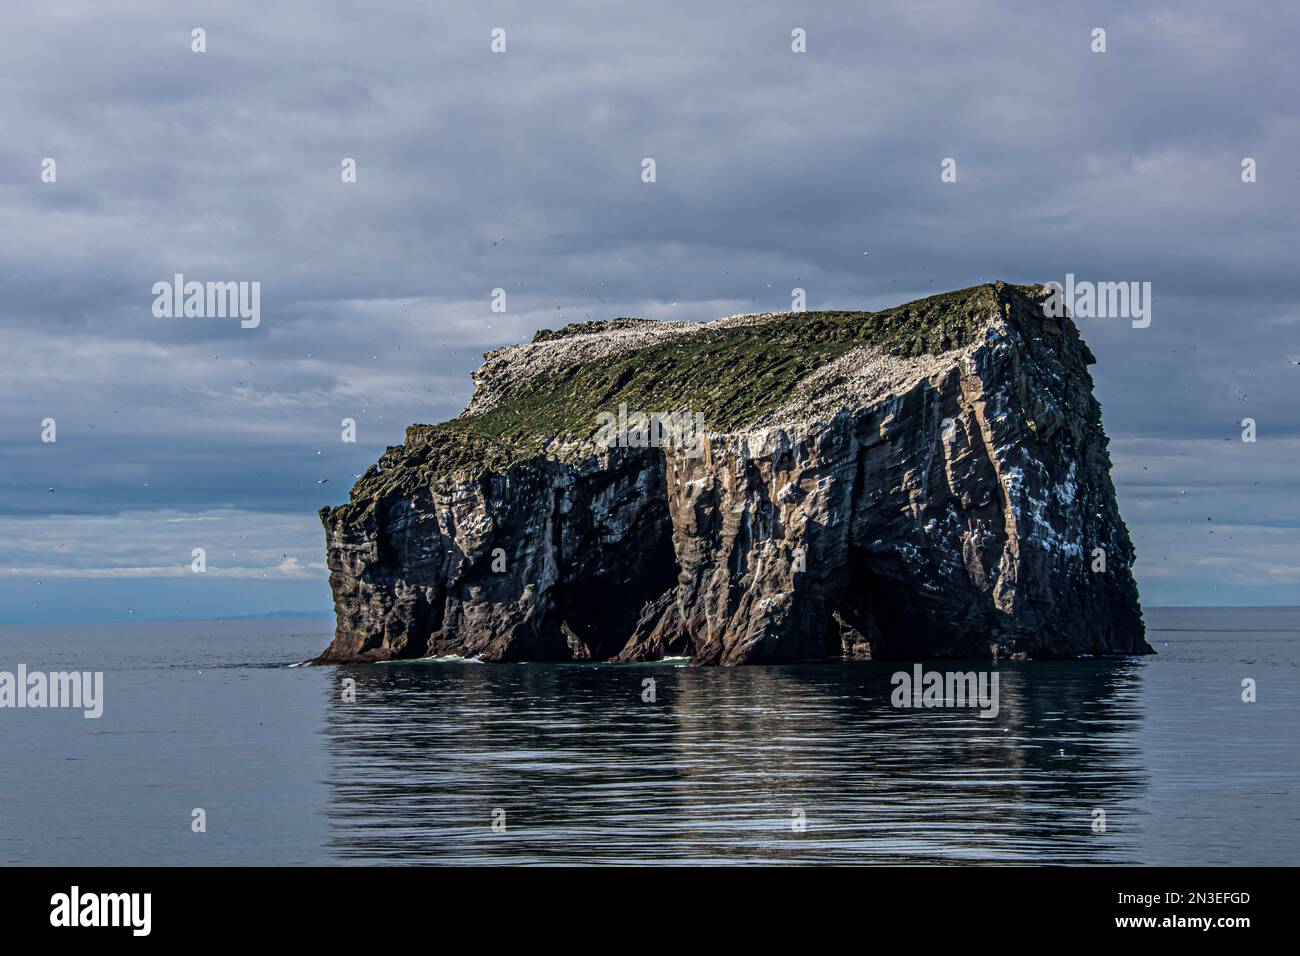 Seabirds flying around a small island, rock formation in the Vestmannaeyjar Archipelago. A young archipelago in geological terms, the islands lie i... Stock Photo